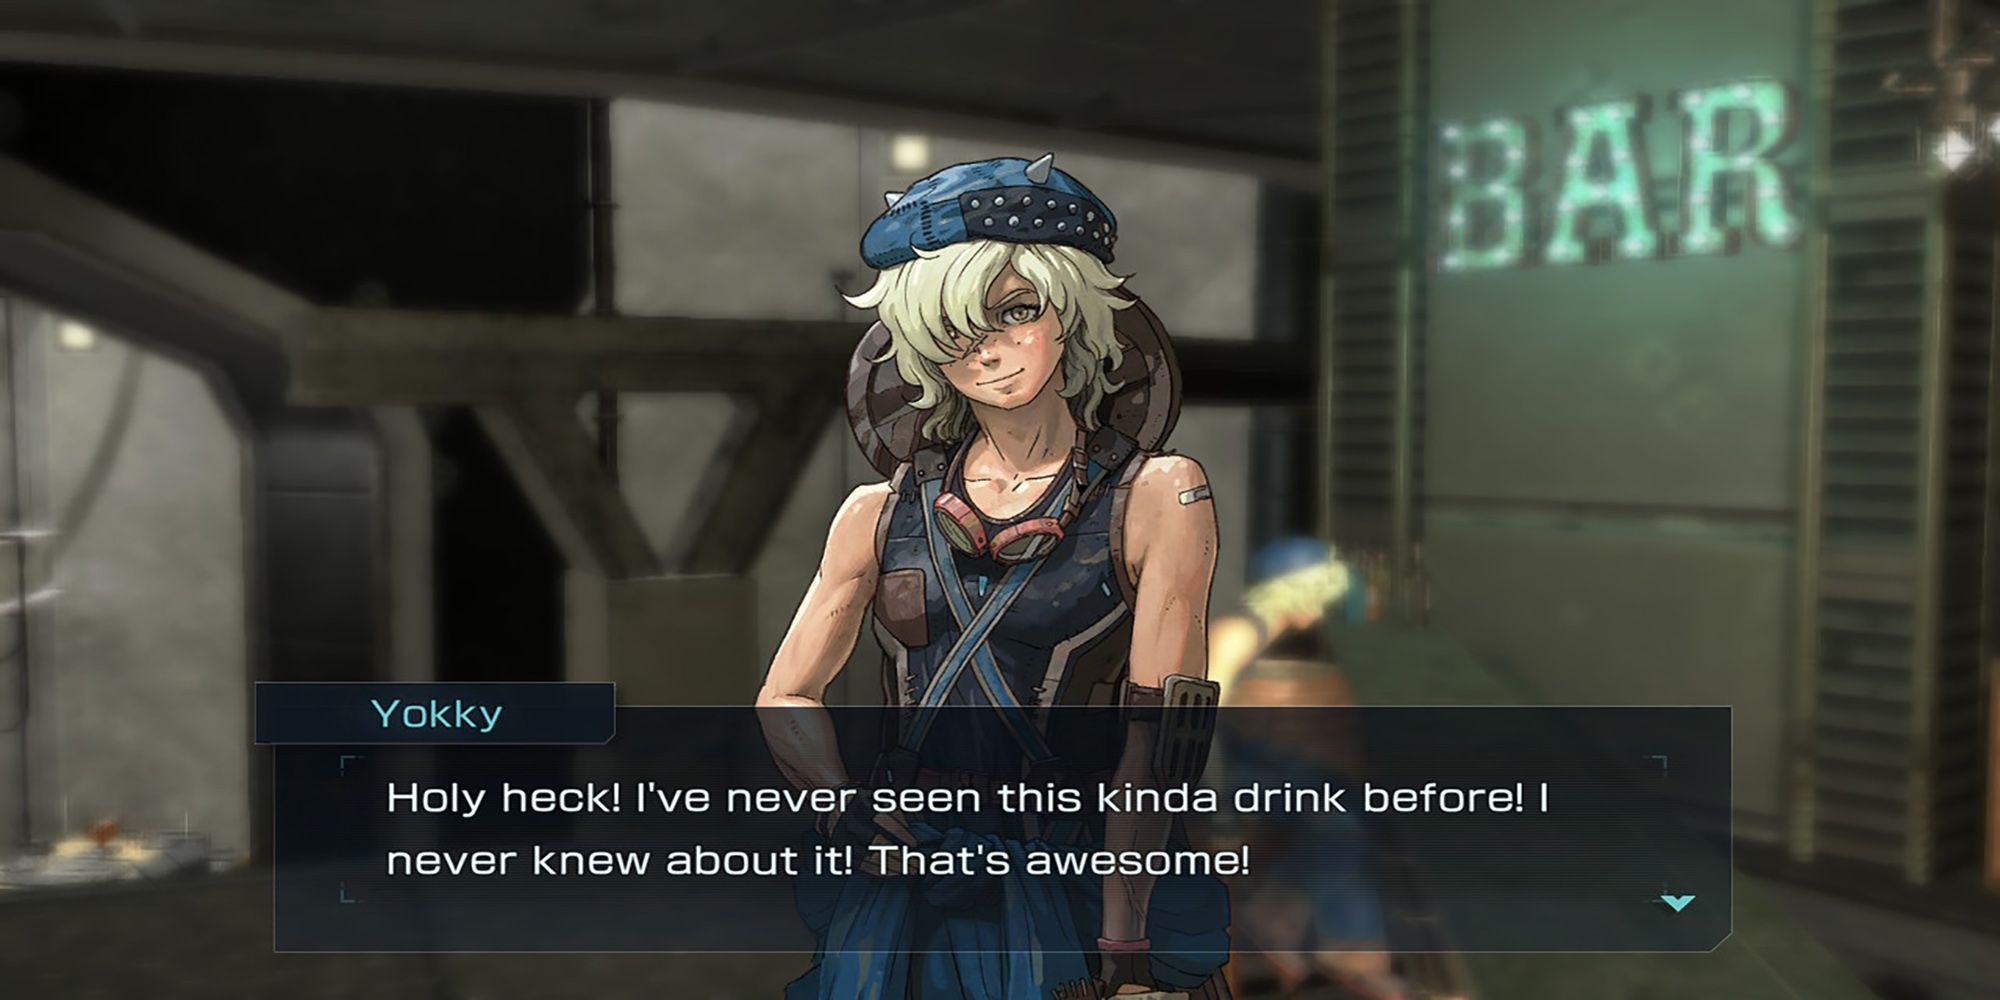 Yokky asks you about the new drink you discovered during a chat at the Iron Base bar in Metal Max Xeno Reborn.